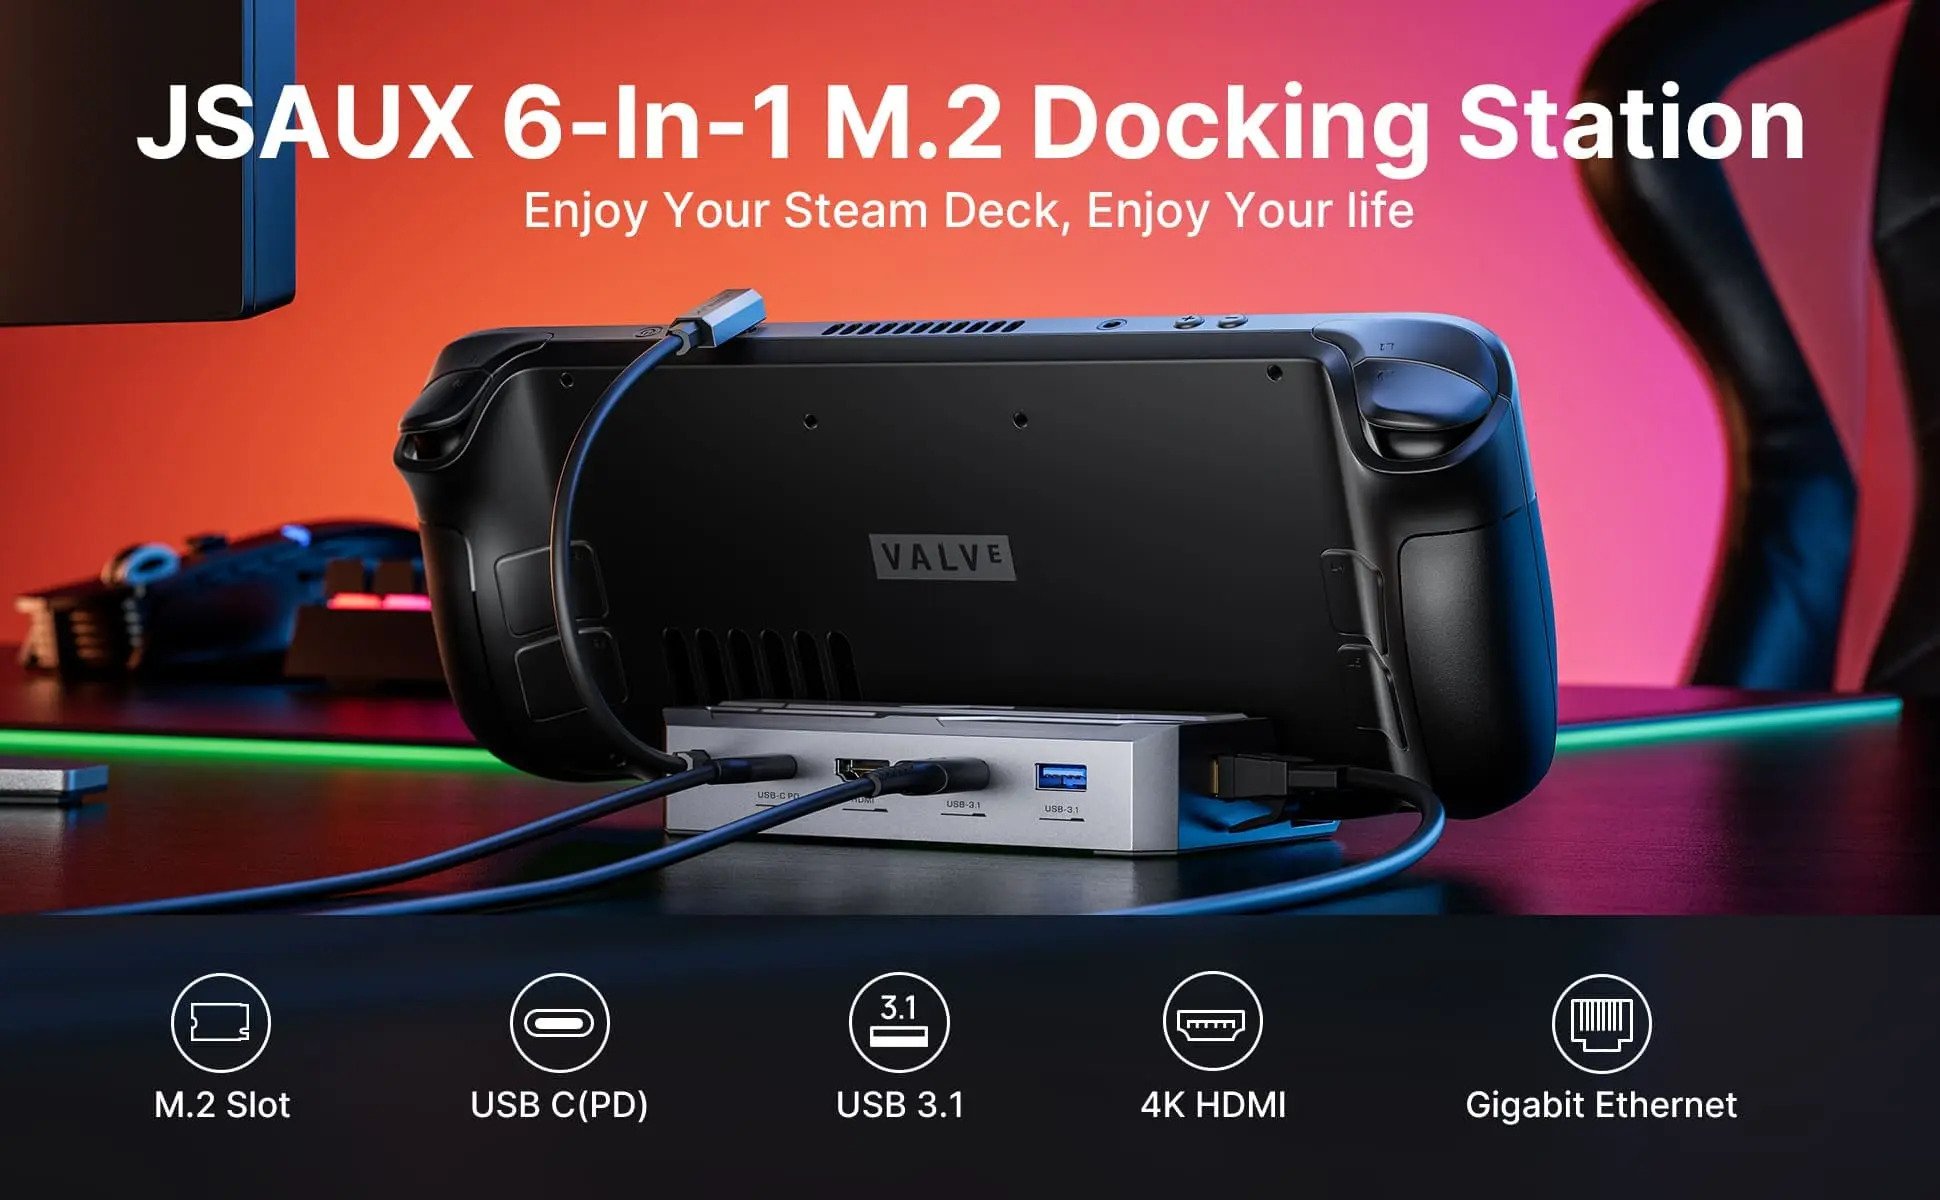 Got a Steam Deck? Then You Need These JSAUX Accessories